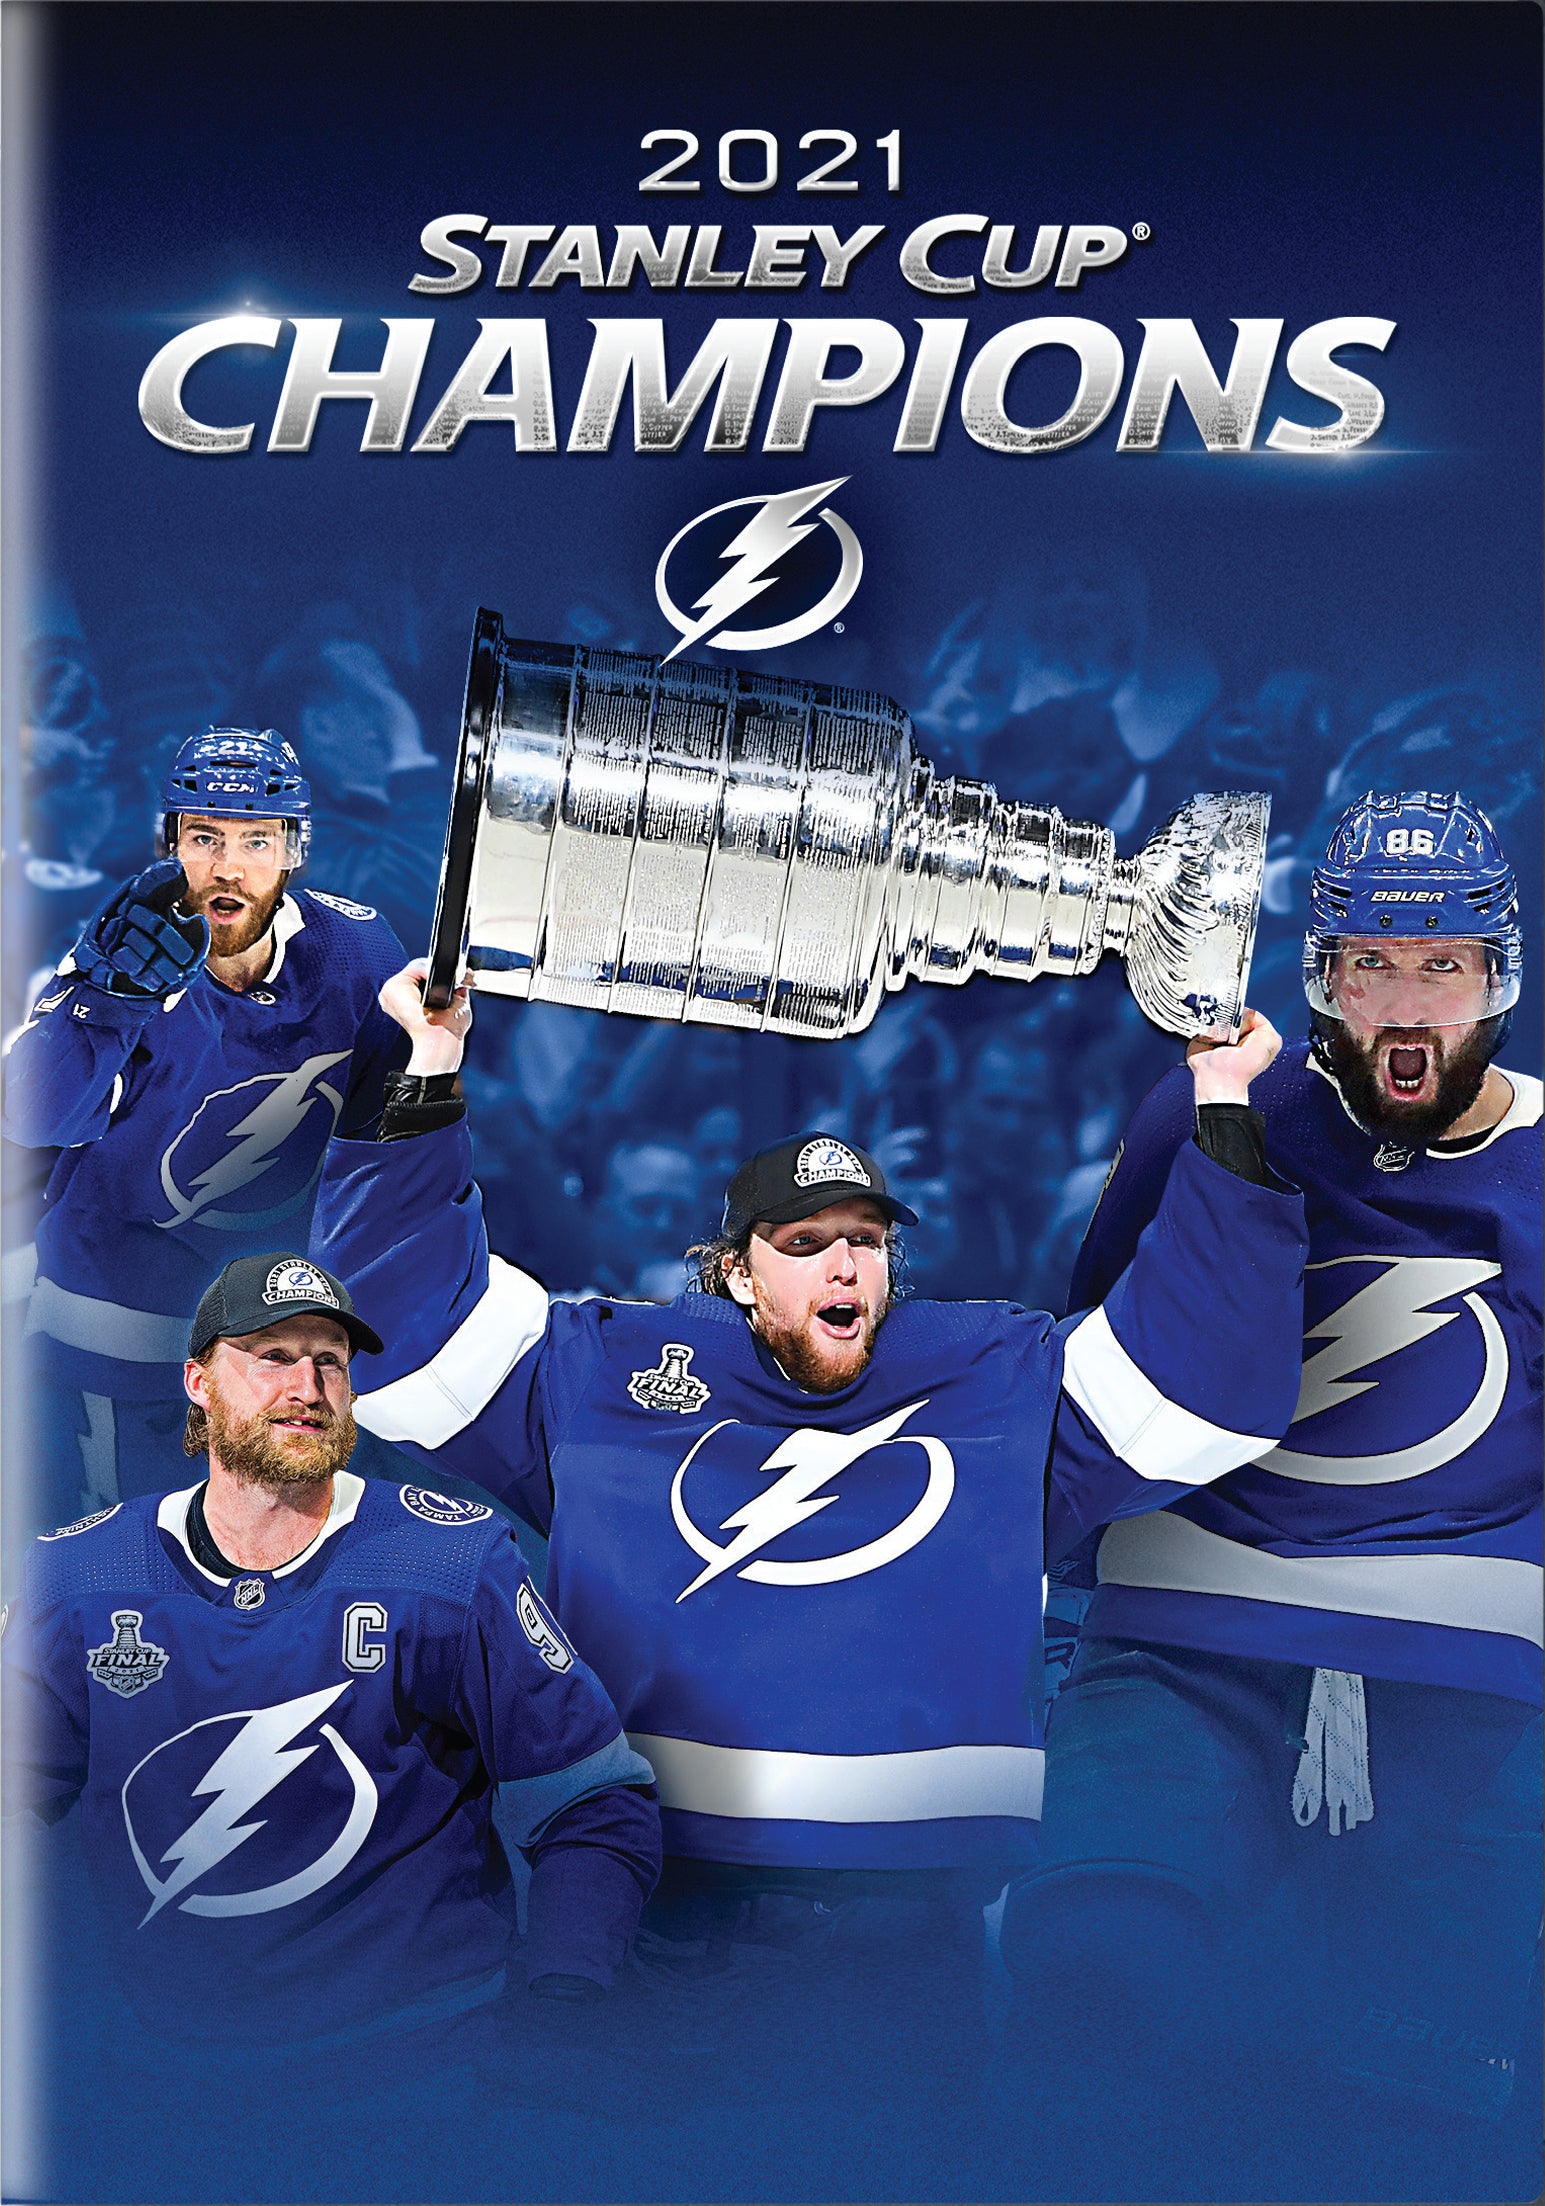 NHL: Stanley Cup 2021 Champions - Tampa Bay Lightning cover art